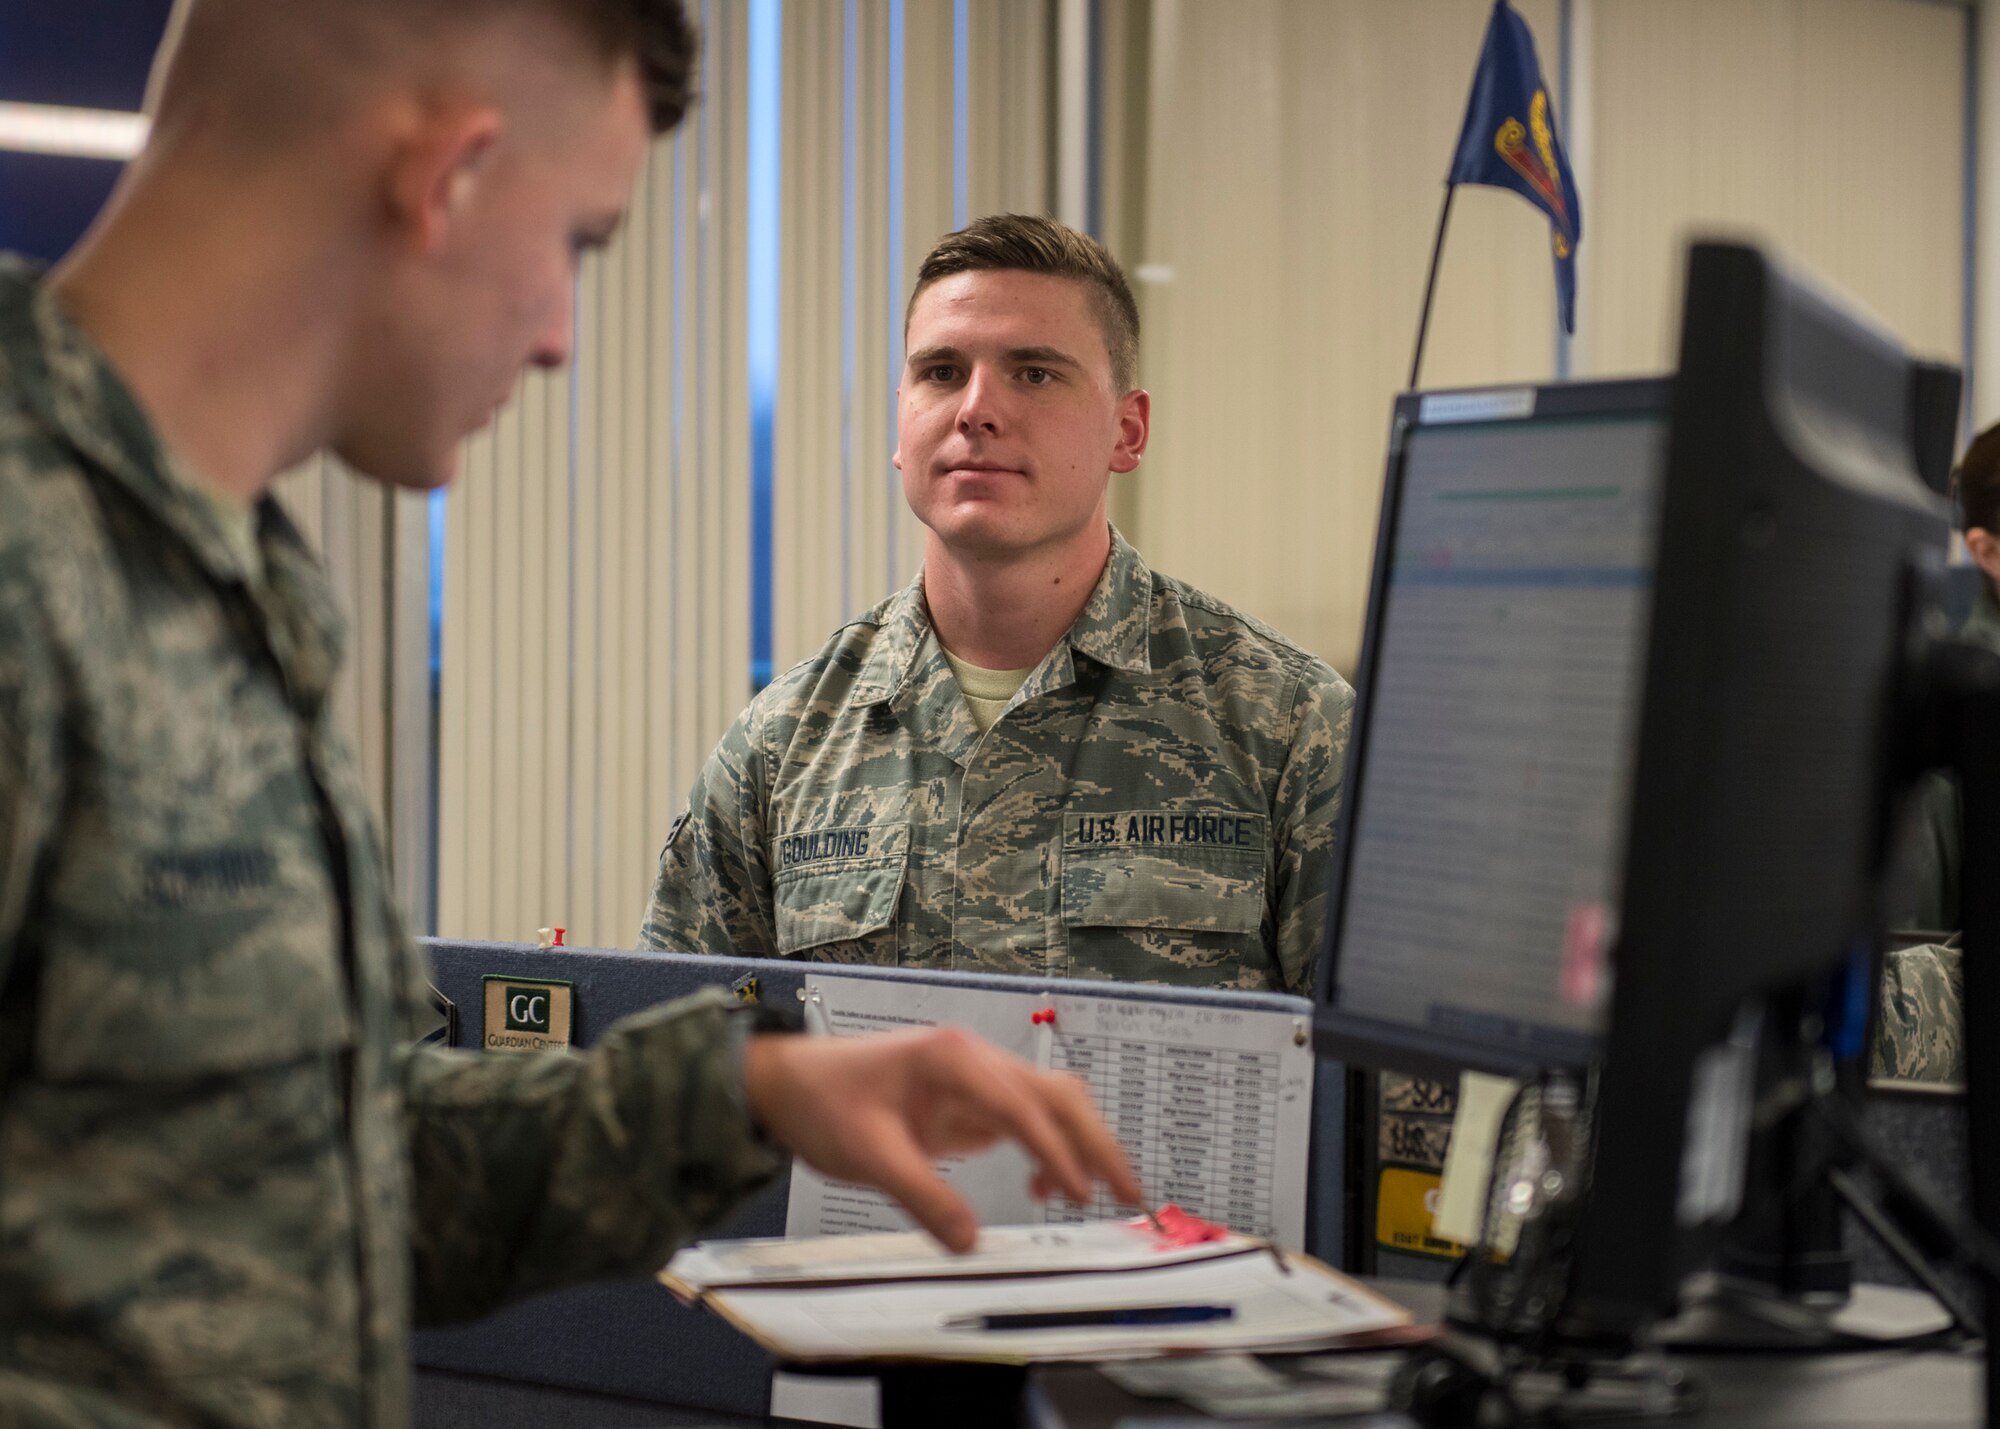 Airmen from the 124th Fighter Wing participate in a pre-deployment function line at Gowen Field, Boise, Idaho, Jan. 11, 2020. The PDF line, hosted by the 124th Force Support Squadron, ensures Airmen are equipped with proper documentation and essentials prior to deployment. (U.S. Air National Guard photo by Airman 1st Class Taylor Walker)